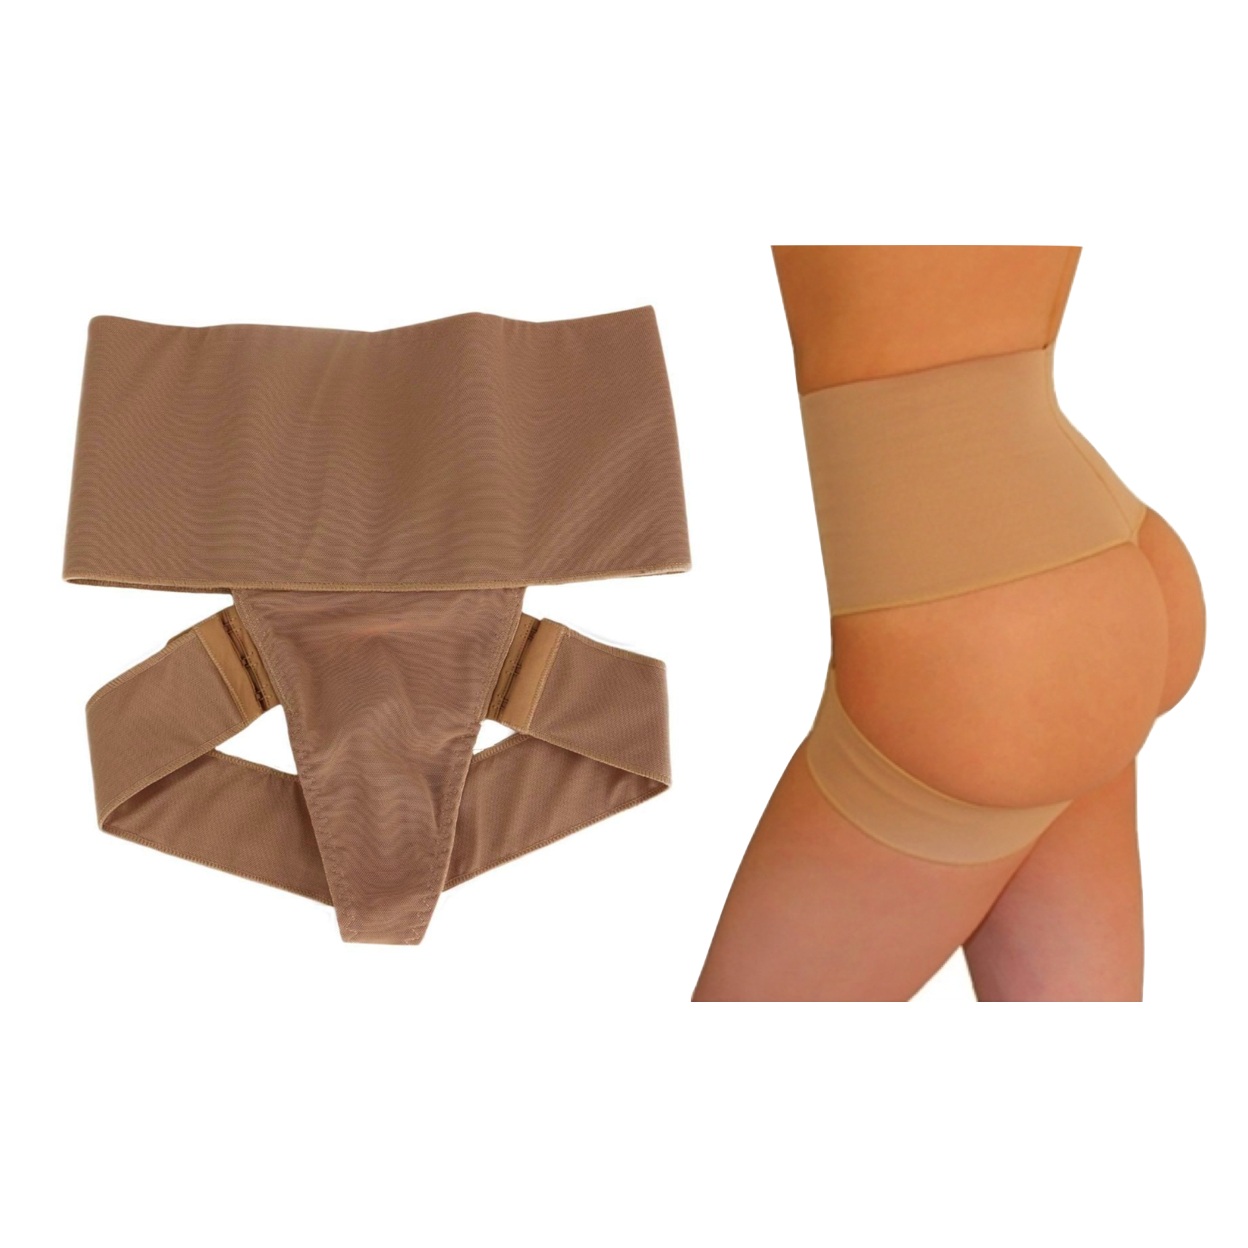 Adjustable Butt Booster Control Shaper In Regular And Plus Sizes - Beige, XL